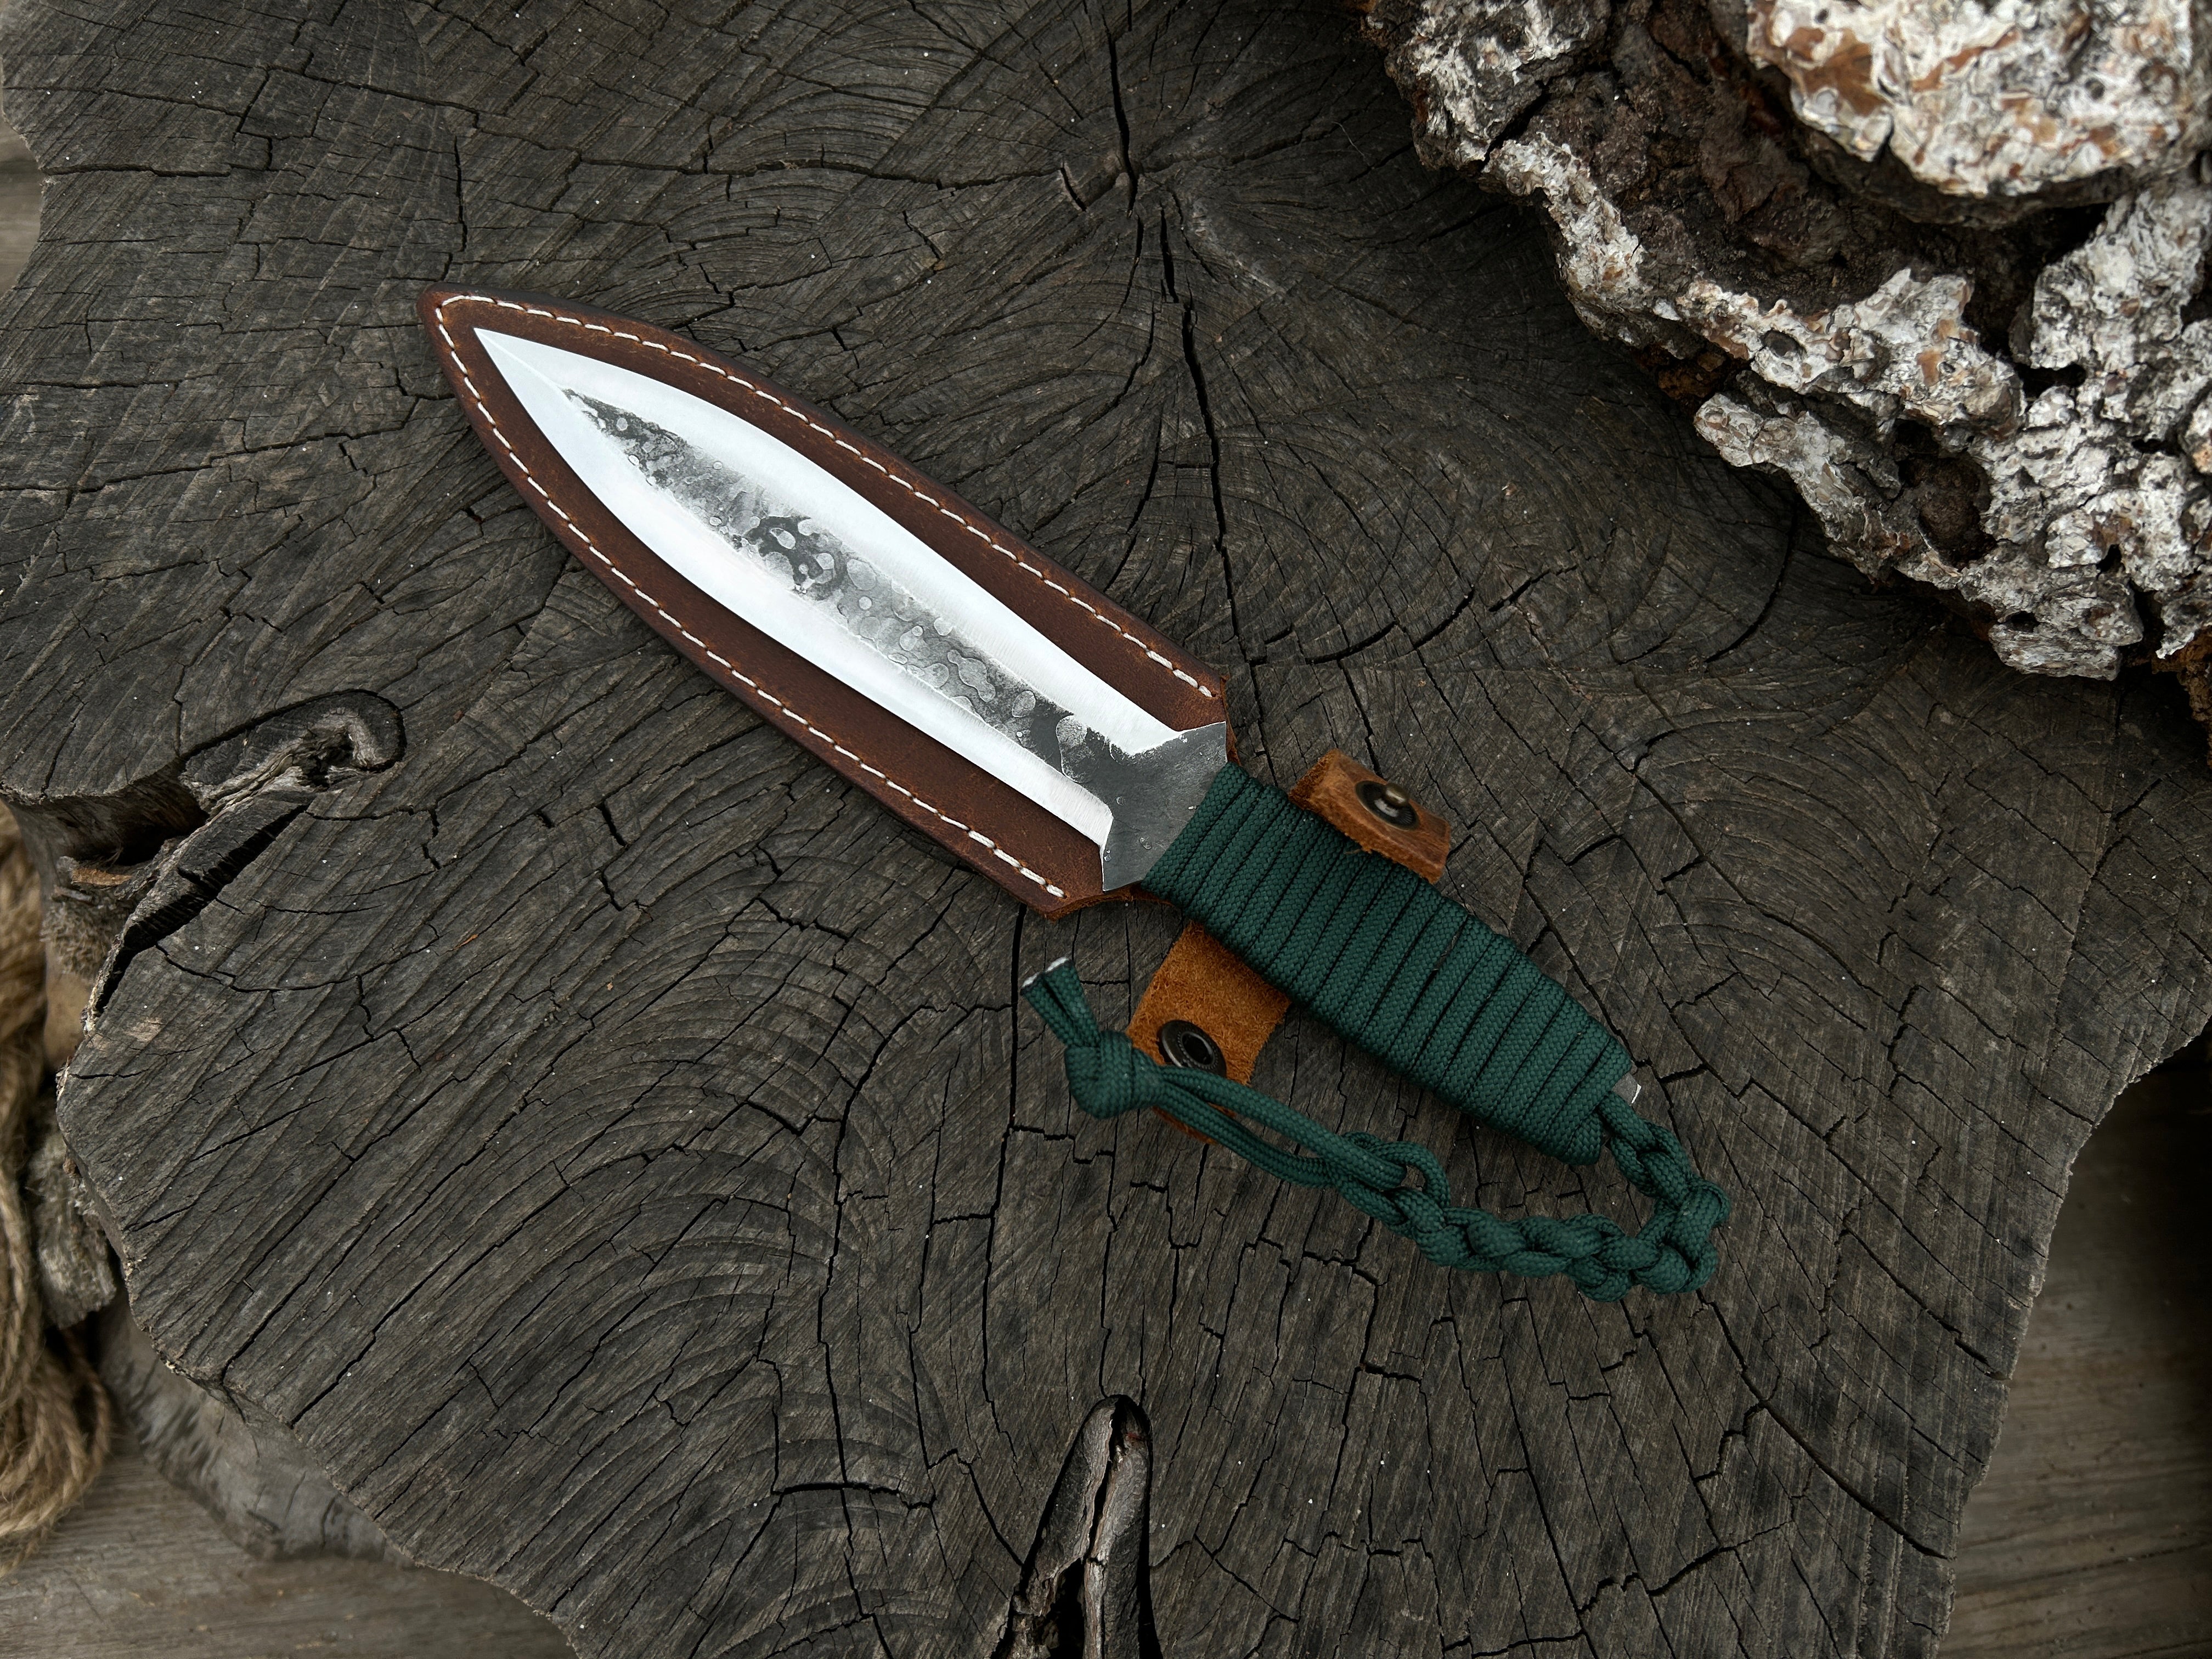 Hand-Forged Throwing Knife, Total Length - 22 cm (8.6 inches)